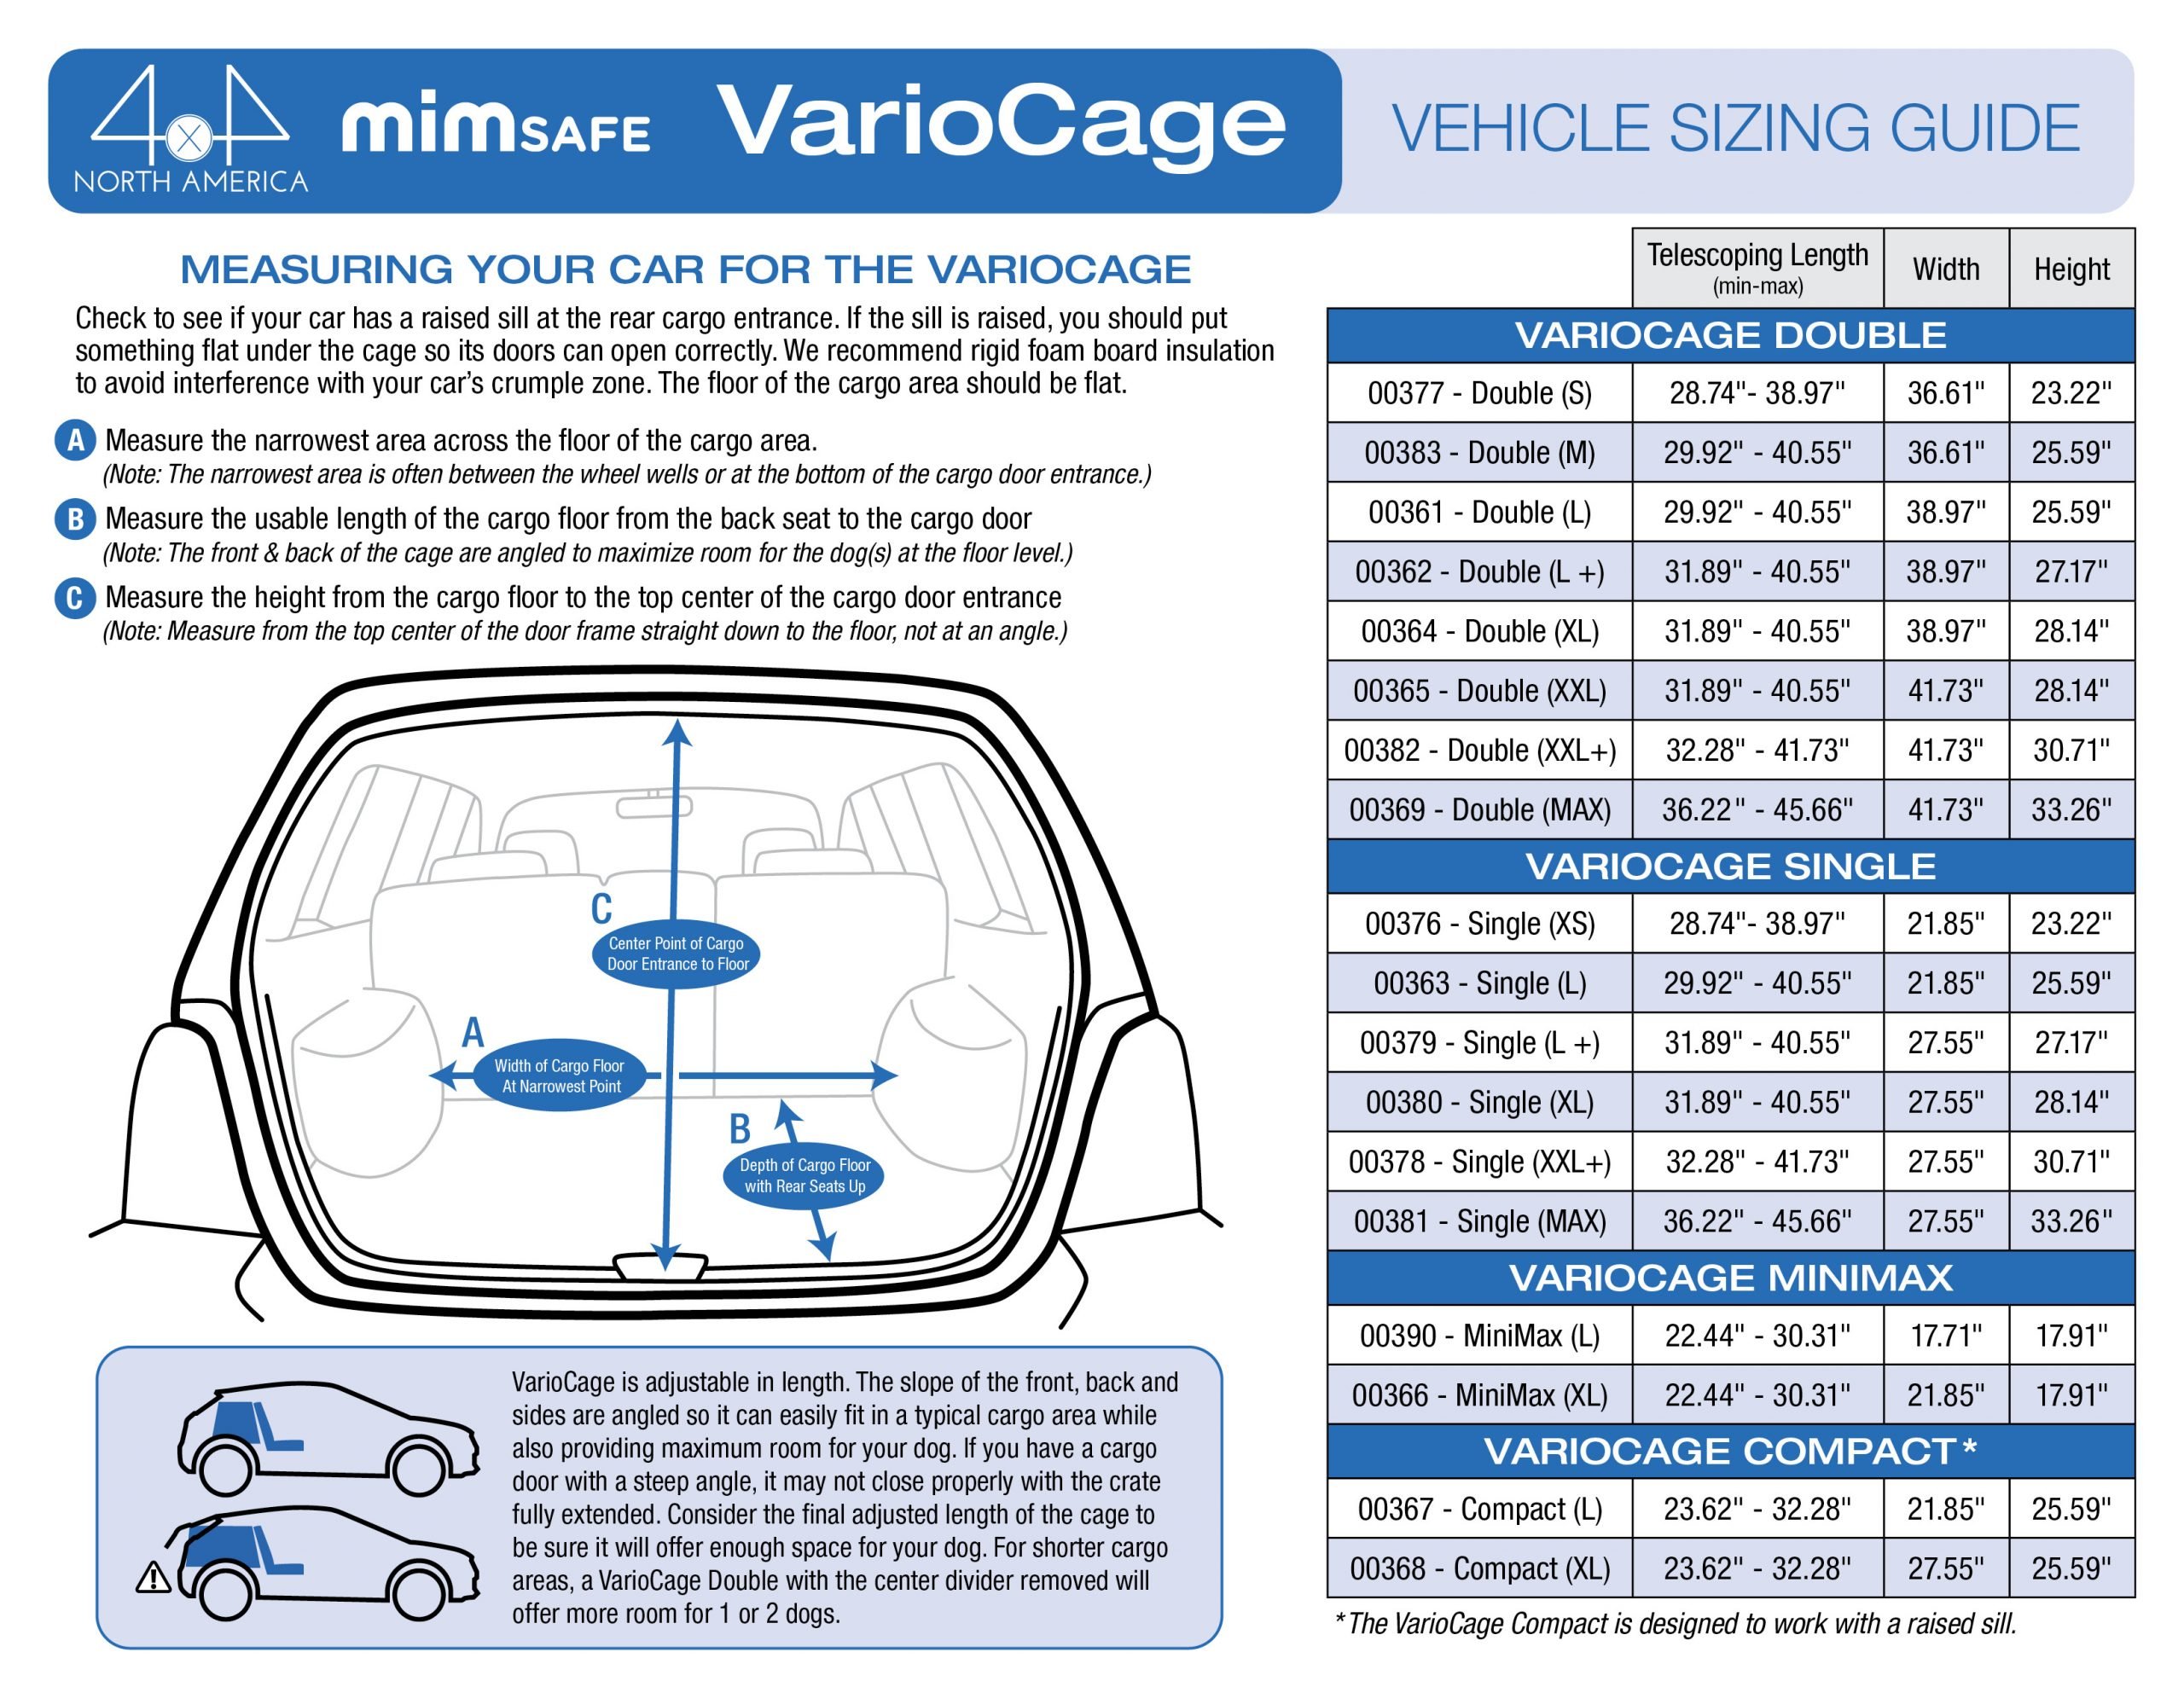 Variocage - Car Sizing Guide-2021